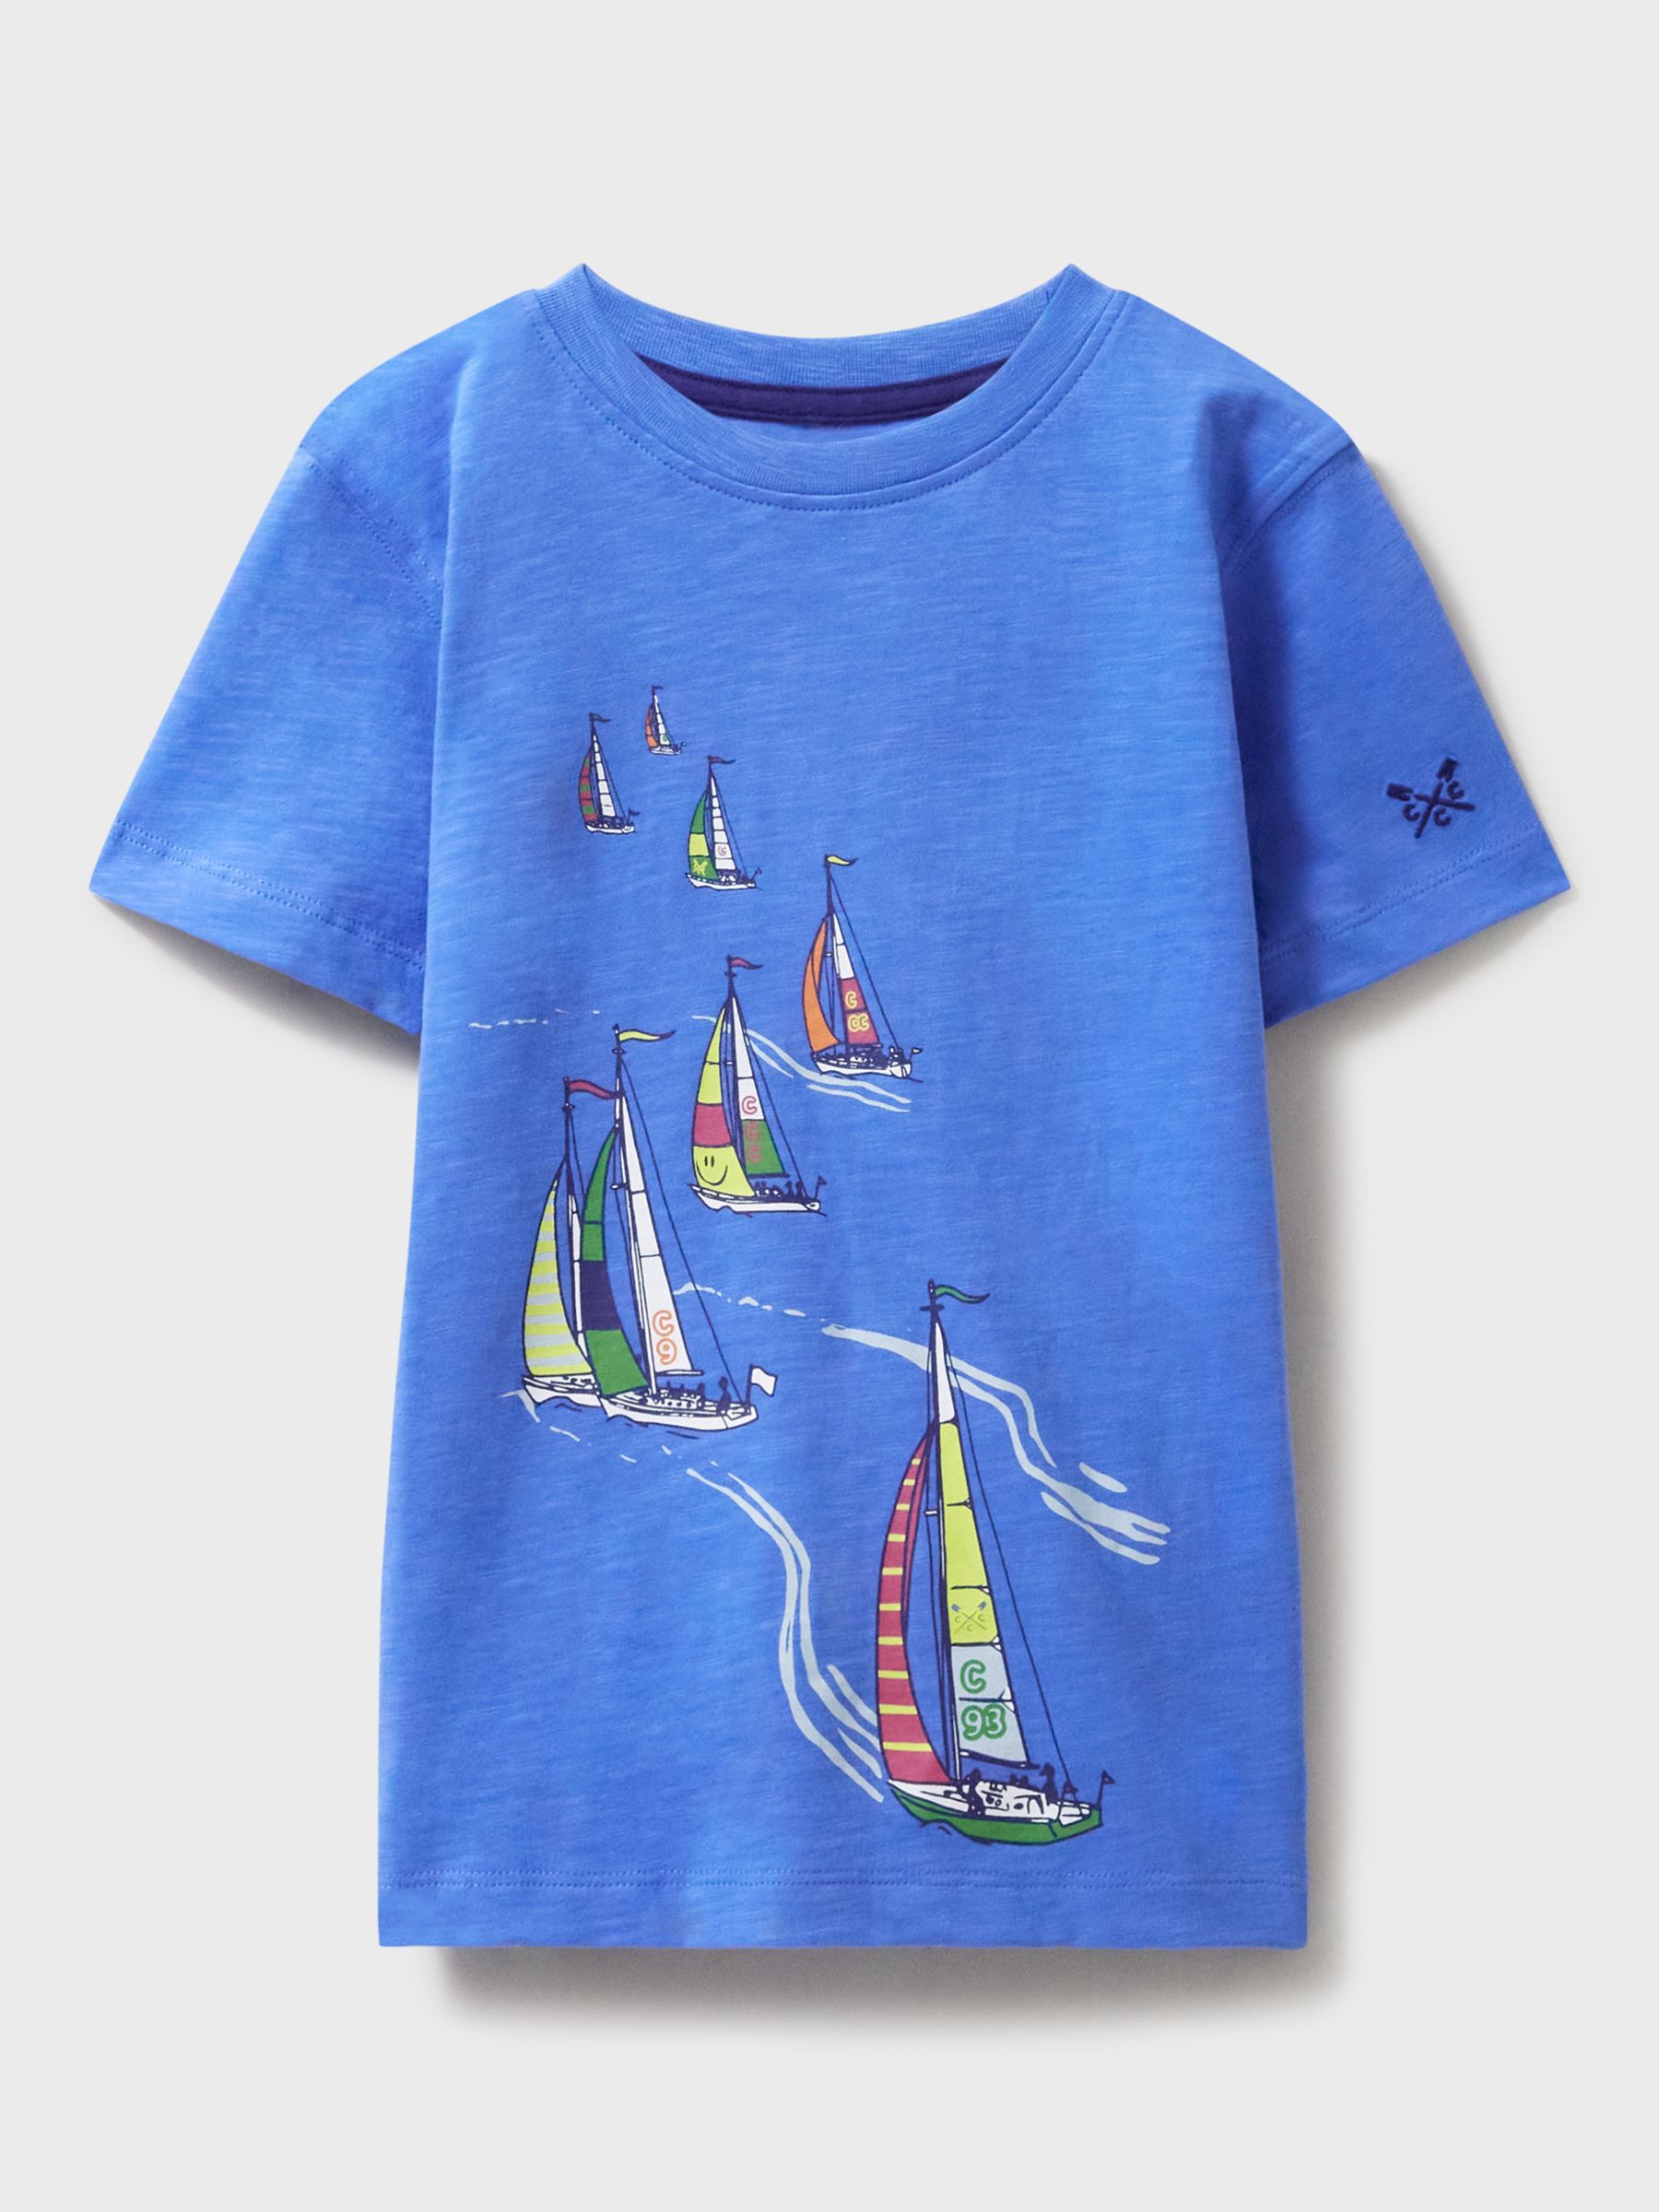 Crew Clothing Kids' Graphic Short Sleeved T-Shirt, Blue/Multi, 8-9 years